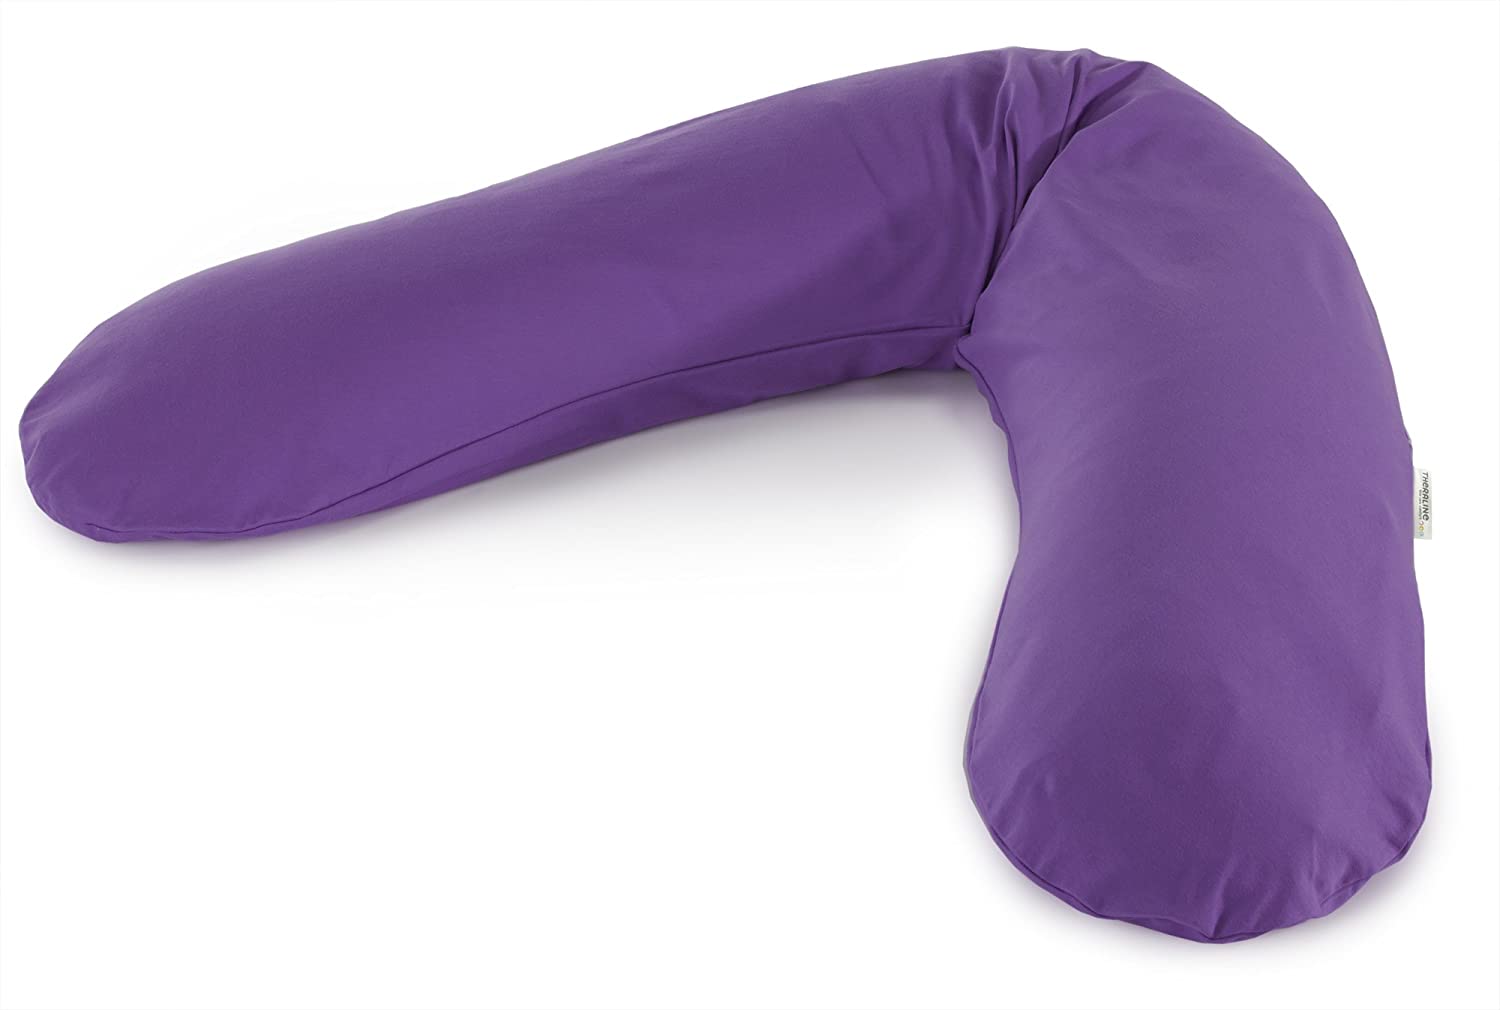 Replacement Cover For The Original Theraline Pregnancy And Nursing Pillow, 100% Cotton. Uni purple